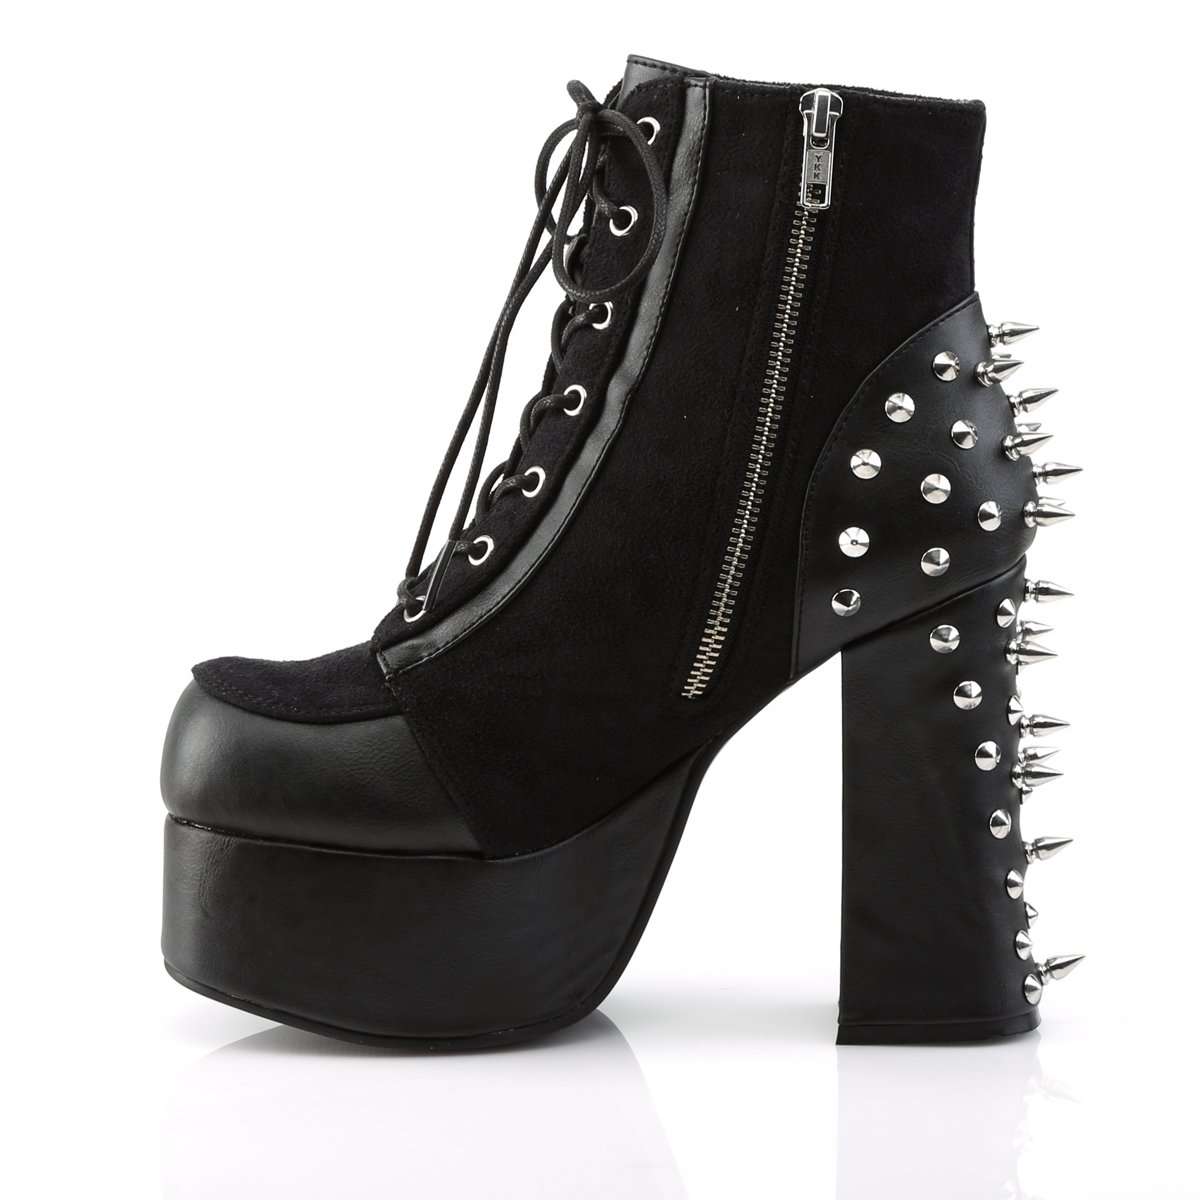 Demonia Platform Boots - Charade 100 Lace-up Spike Boots